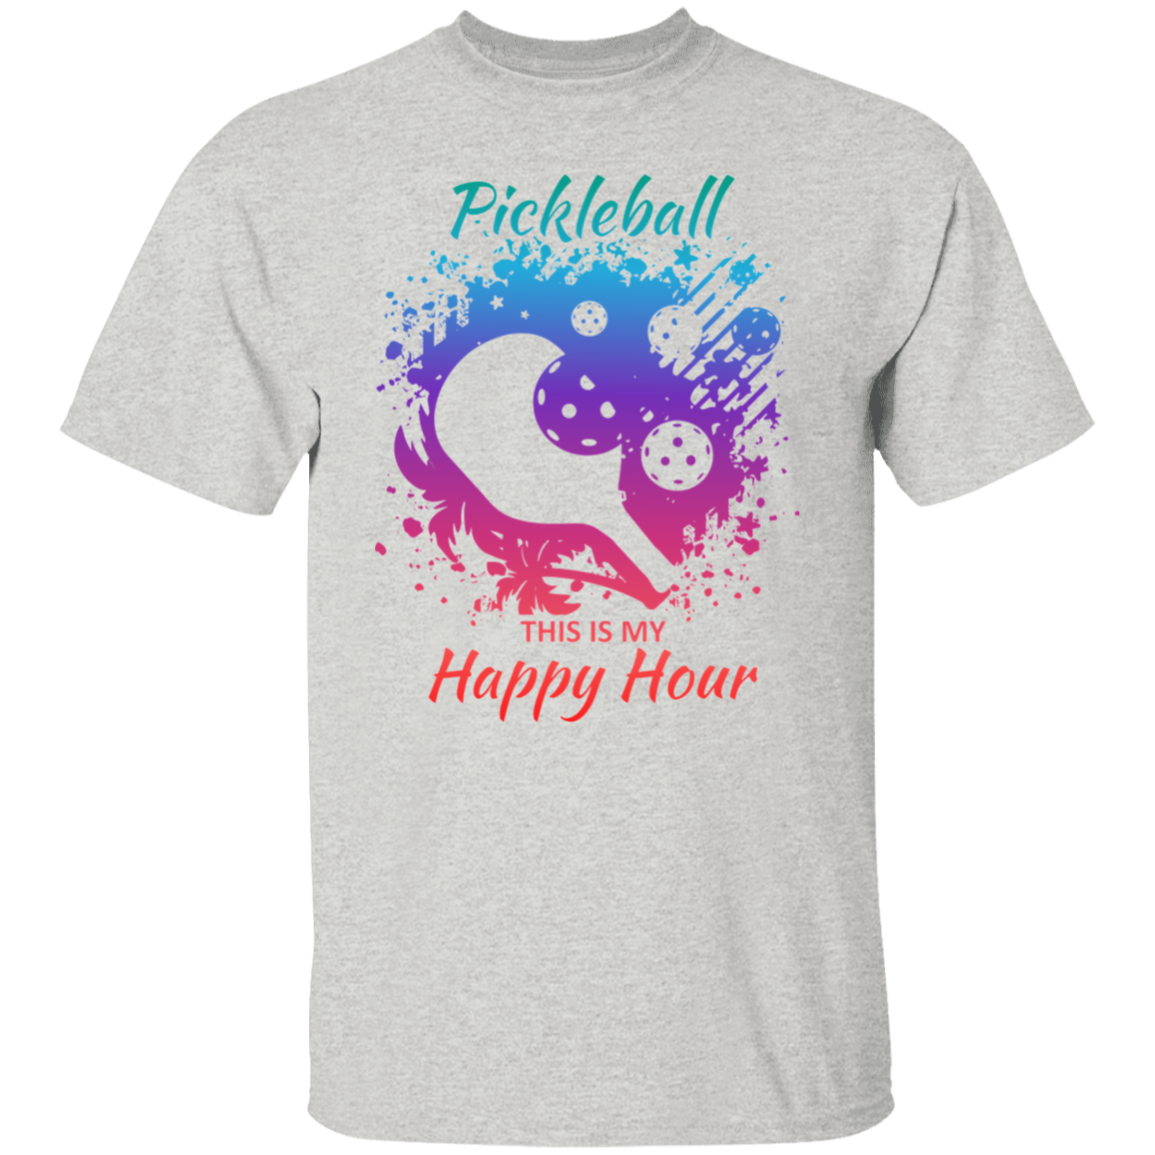 Pickleball is my Happy Hour T-Shirt